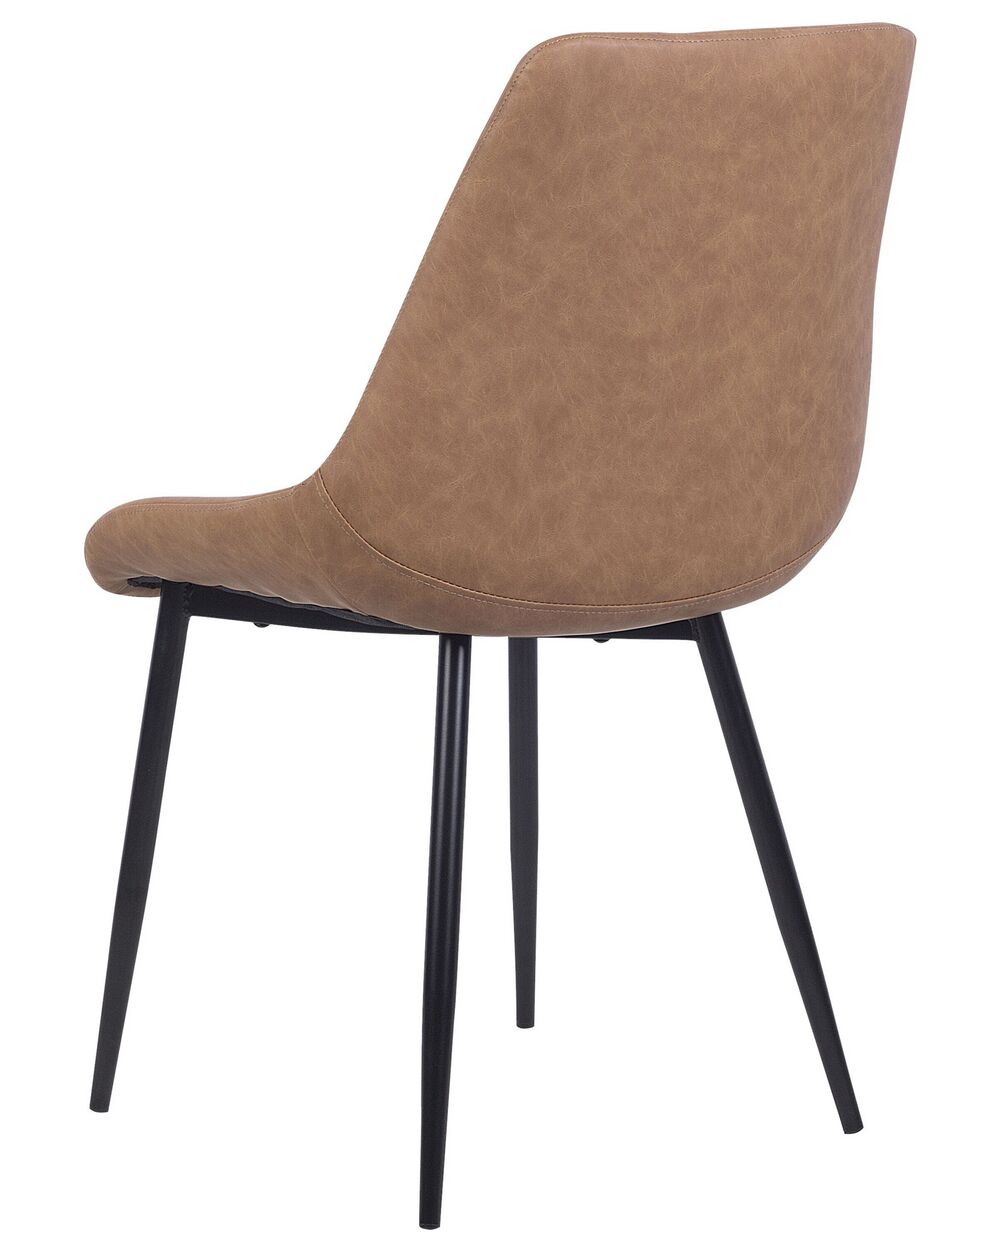 Set of 2 Faux Leather Dining Chairs Golden Brown MARIBEL | Beliani.co.uk